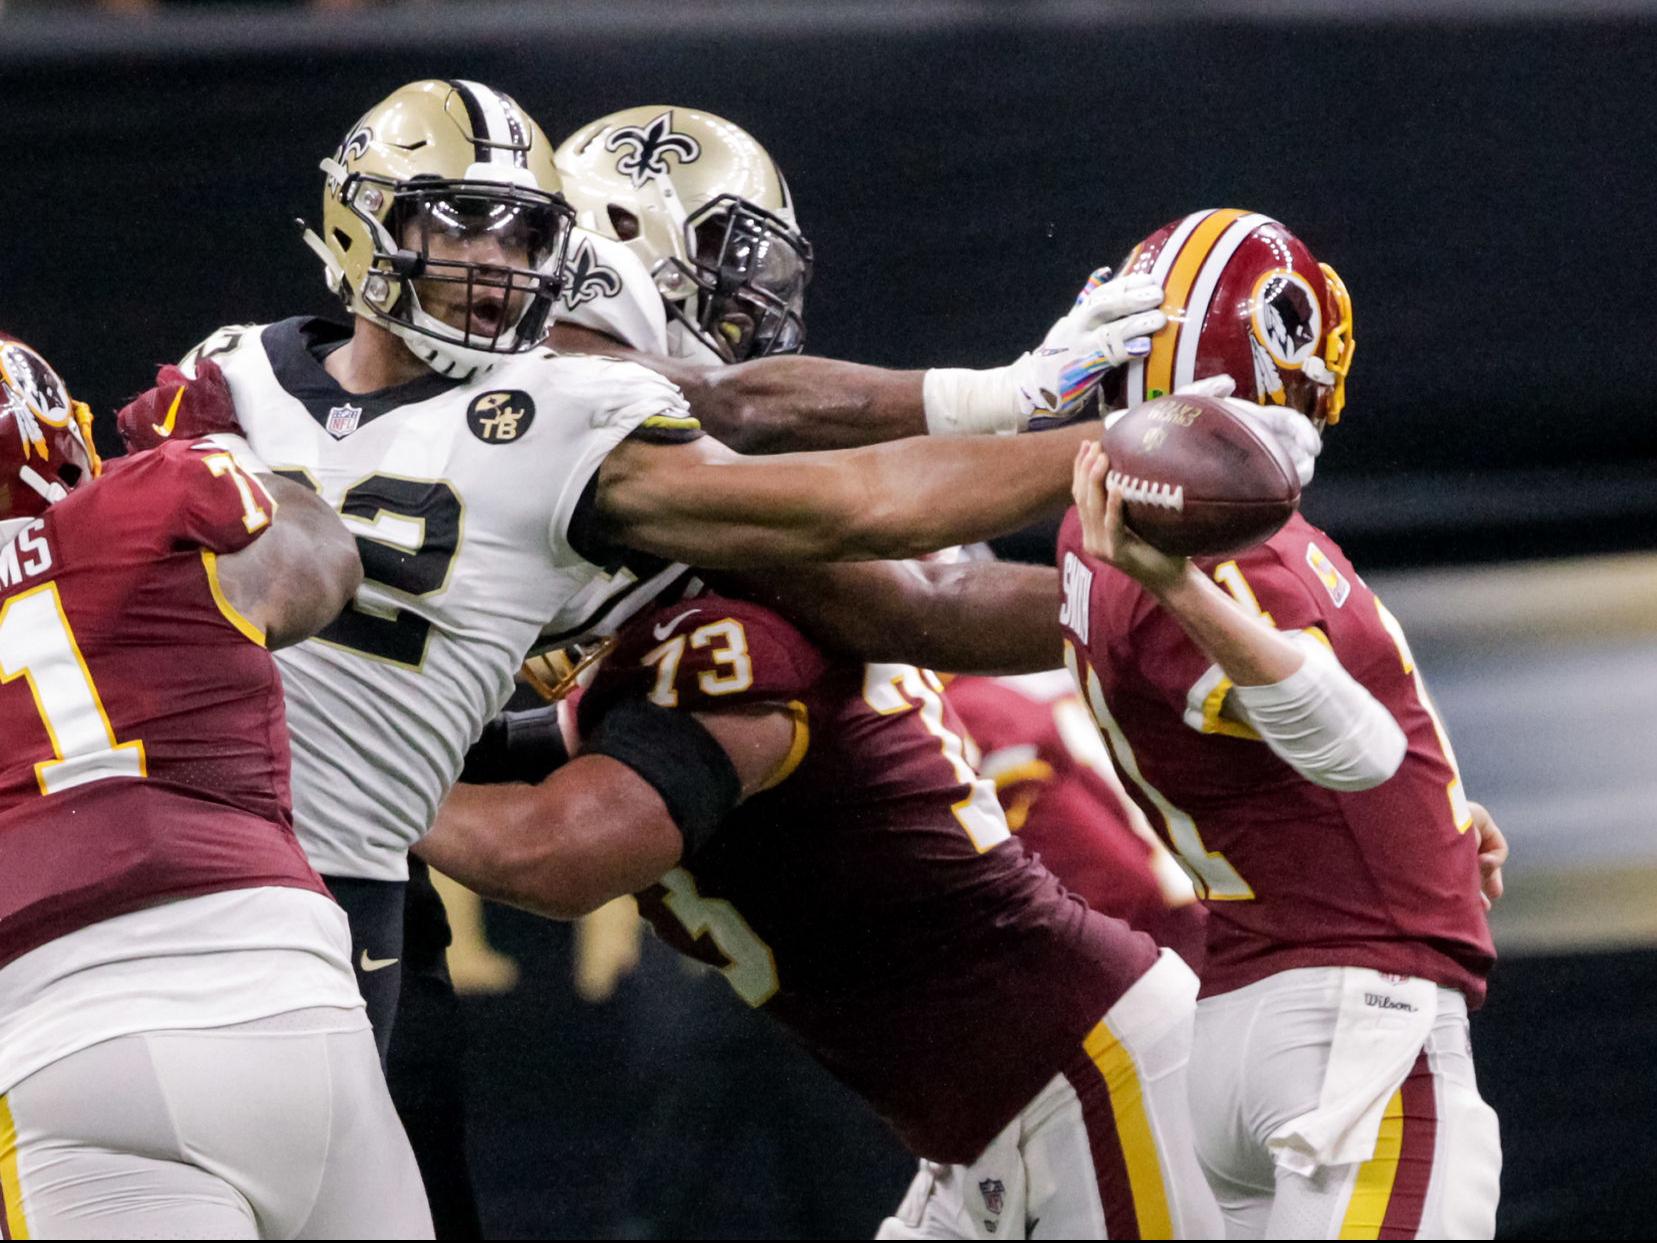 Saints' Marcus Davenport is one of the NFL's most improved players